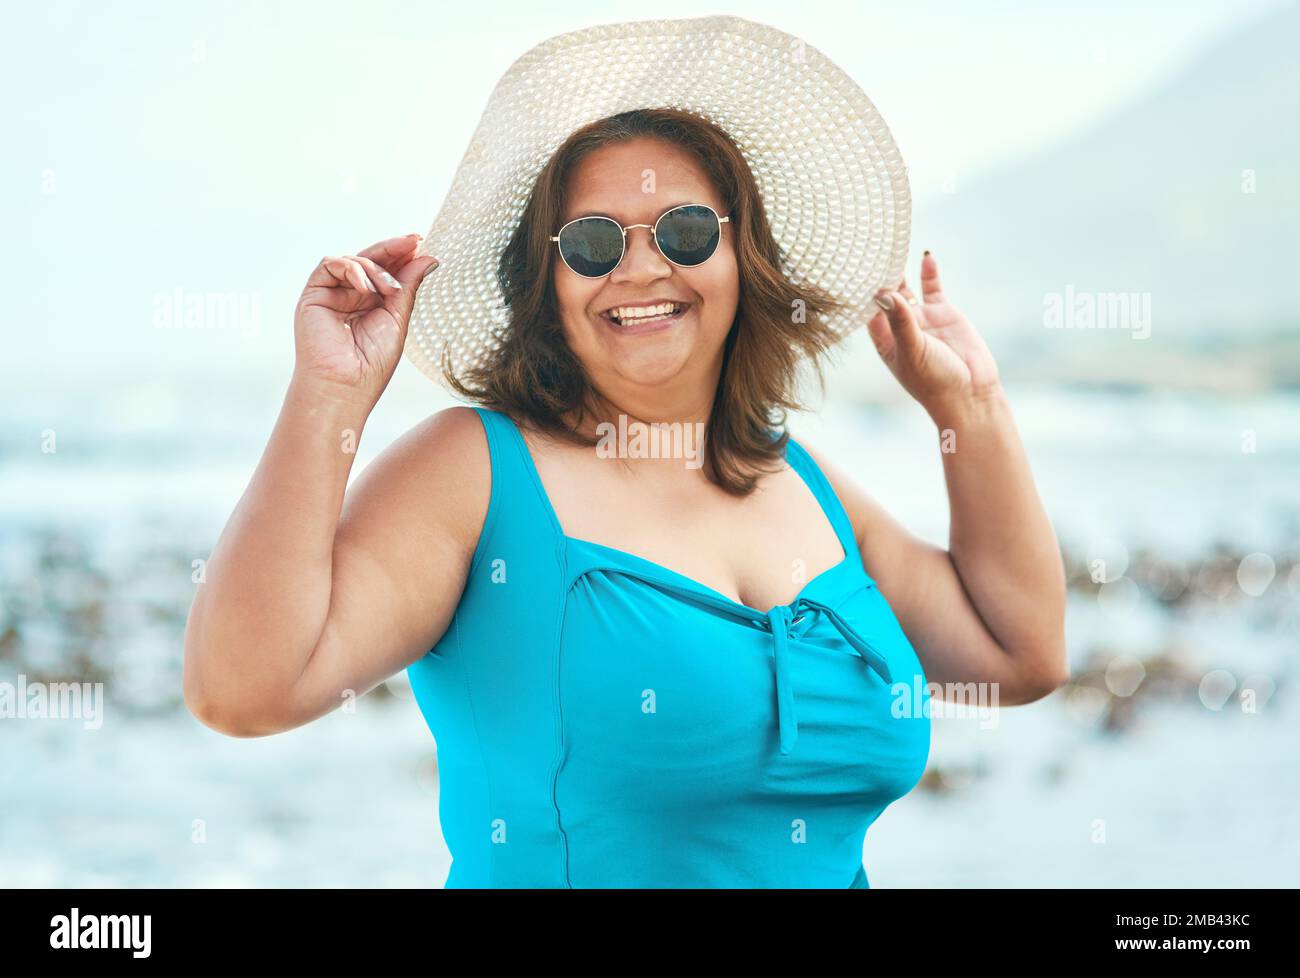 Swimsuits were made to be worn no matter your age. an attractive mature woman standing alone during a day out on the beach. Stock Photo